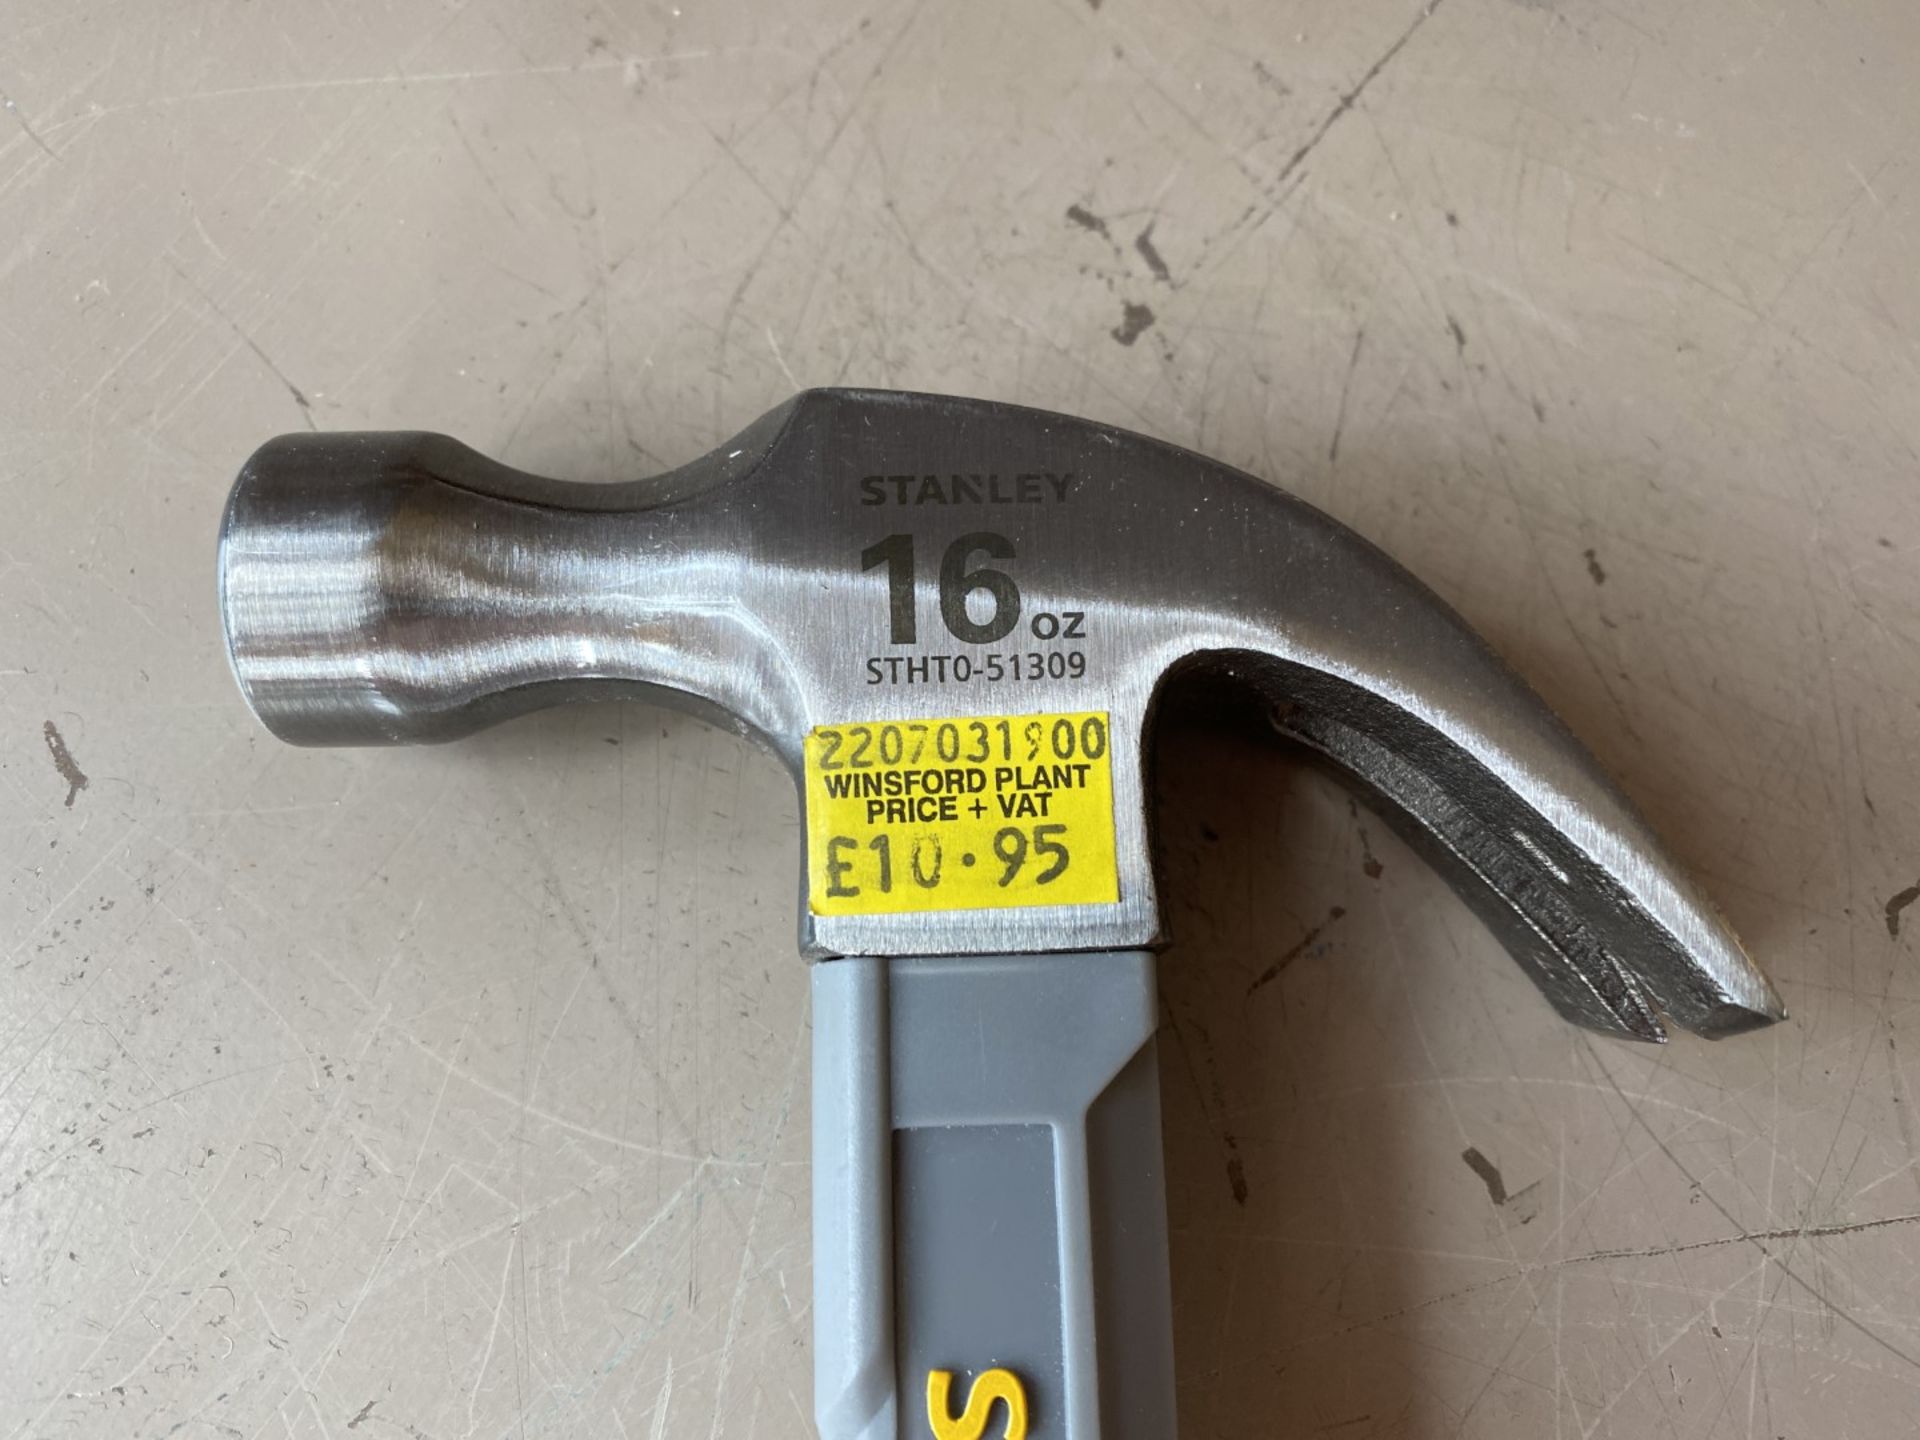 NEW Stanley 16oz curved claw hammer, RRP £10.95 - Image 2 of 2